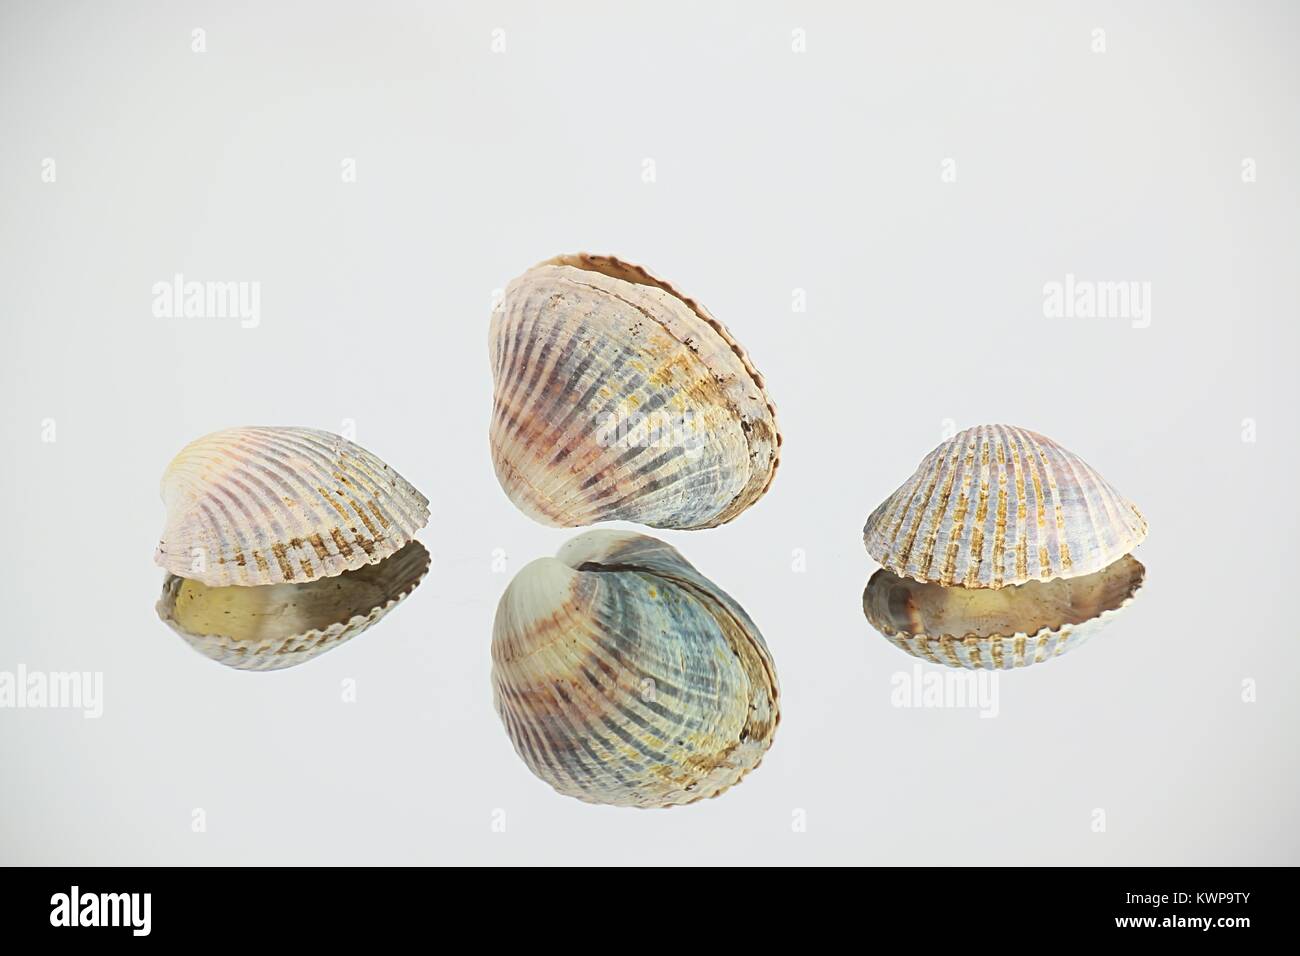 Lagoon cocle, Cerastoderma glaucum, a common saltwater clam, from the Baltic Sea Stock Photo